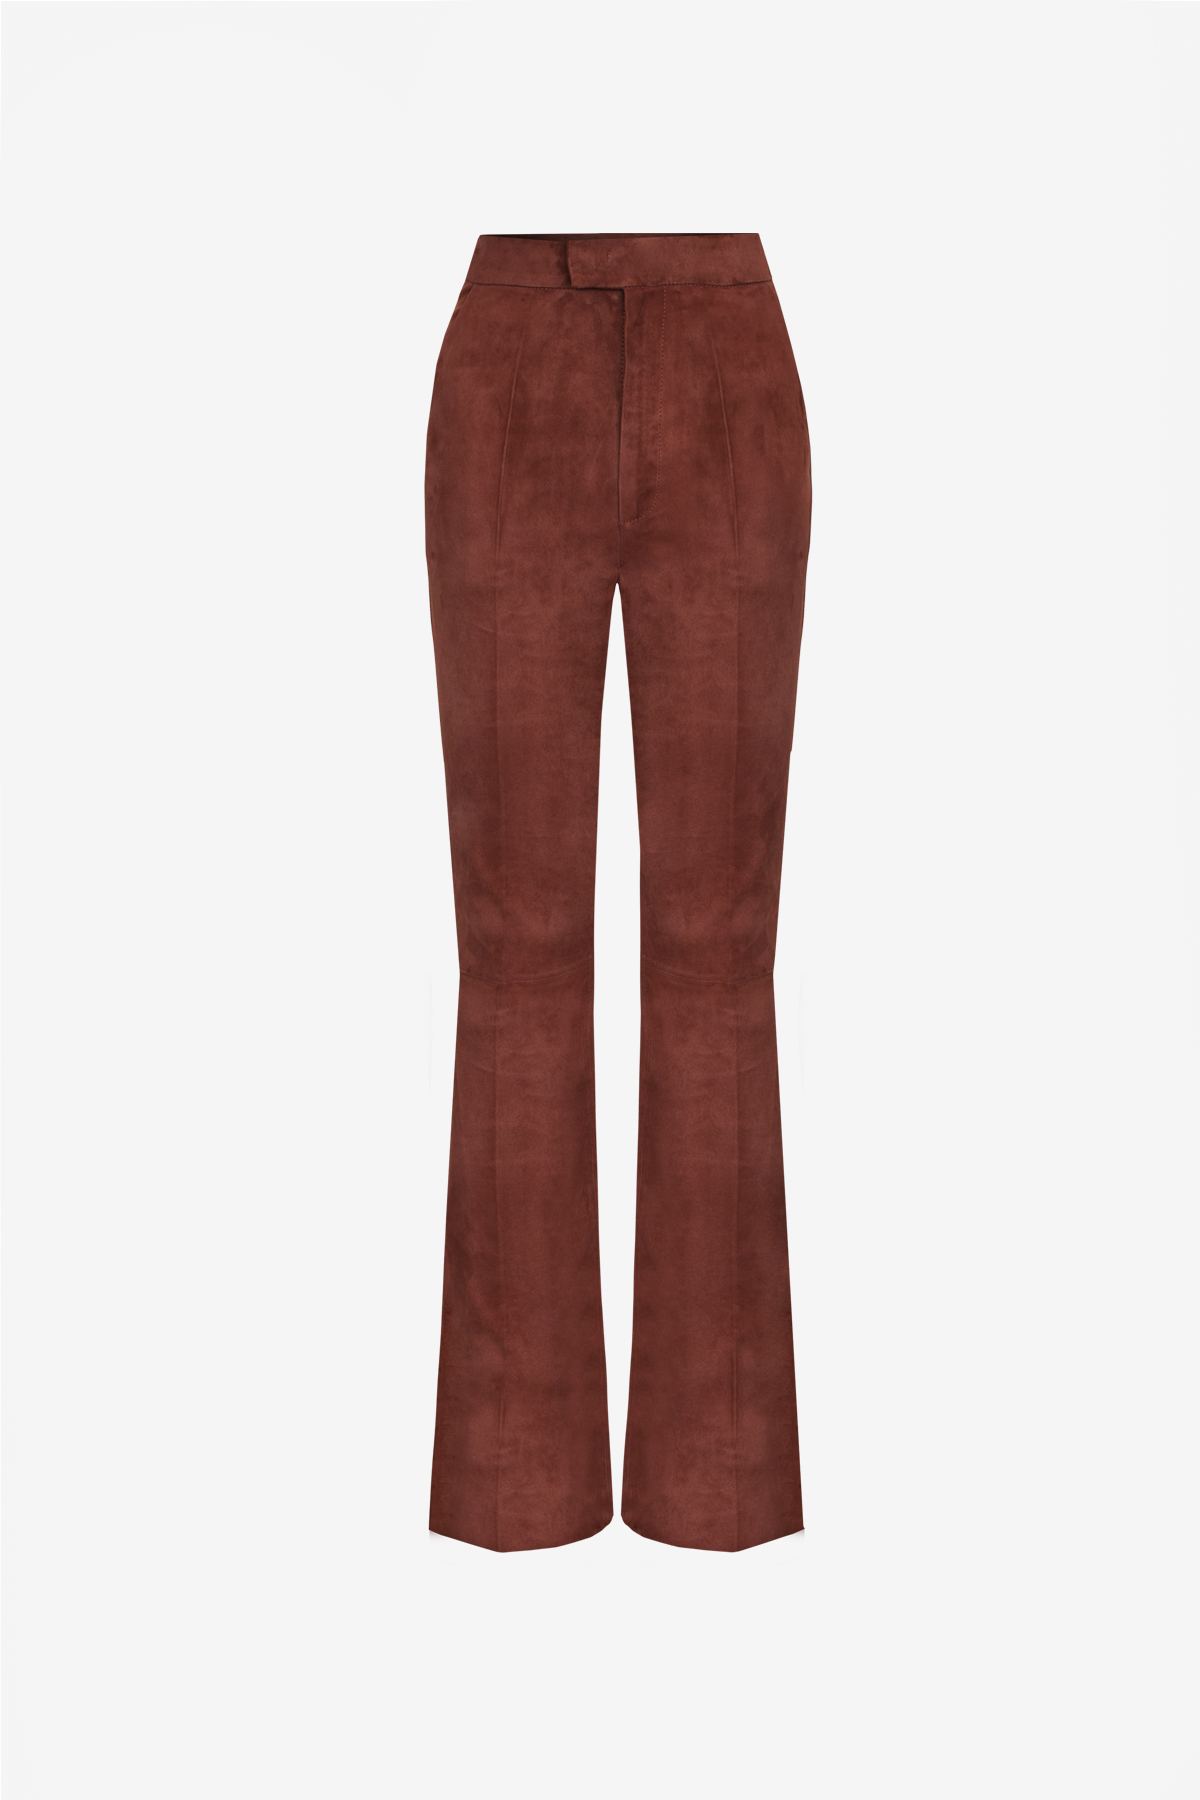 SLY 010 Flare Suede Brown // Flared suede leather pants